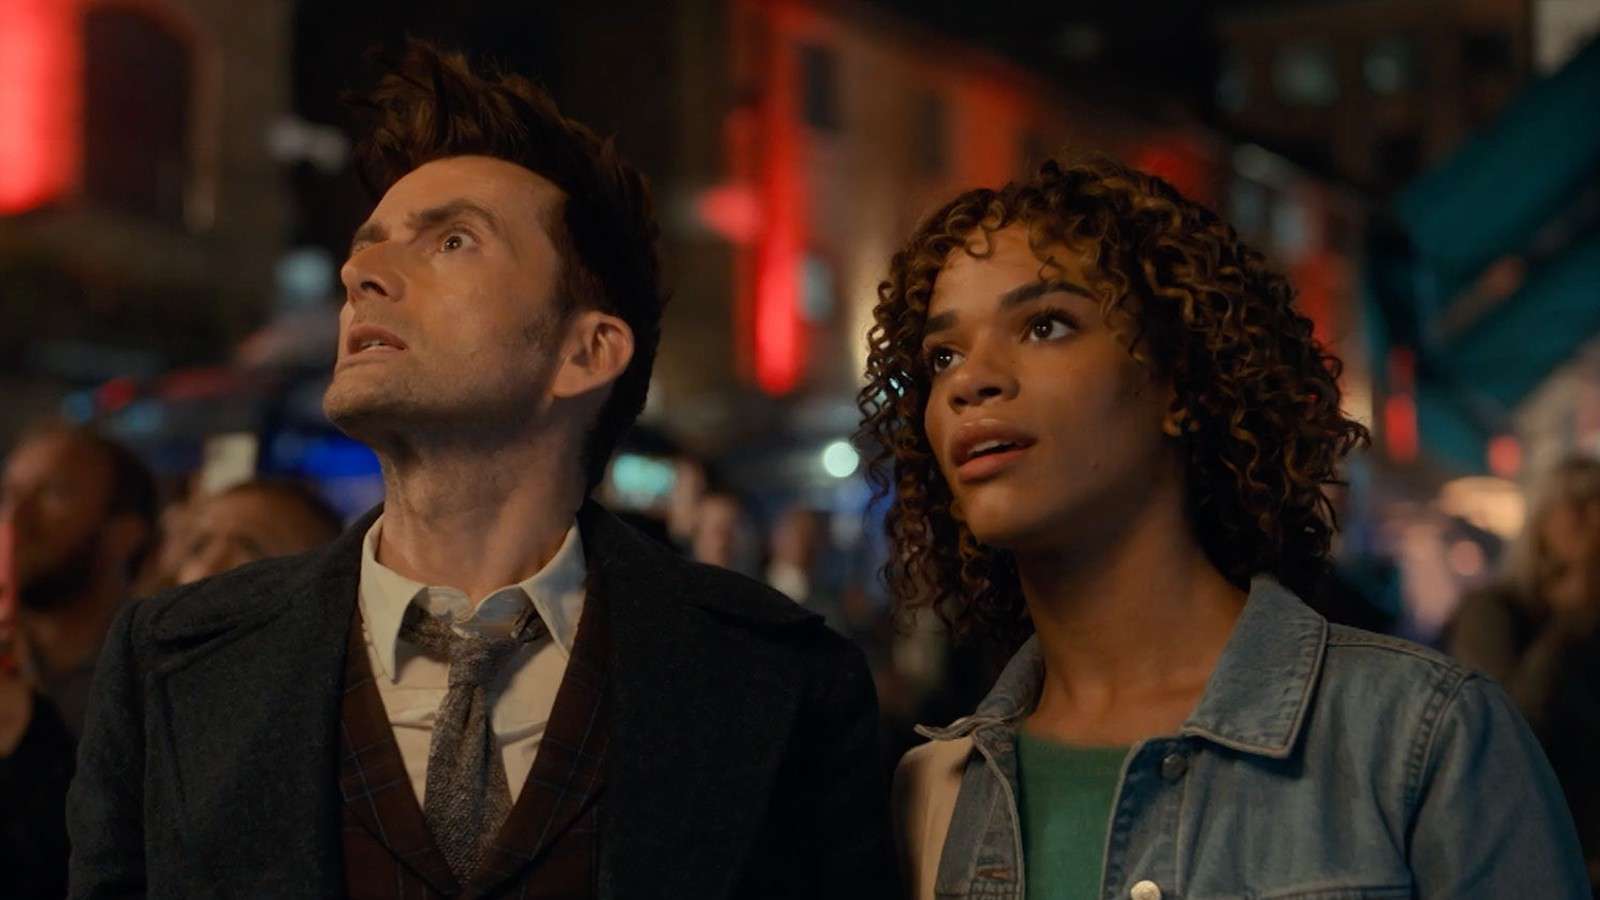 An image of David Tennant and Yasmin Finney in Doctor Who.